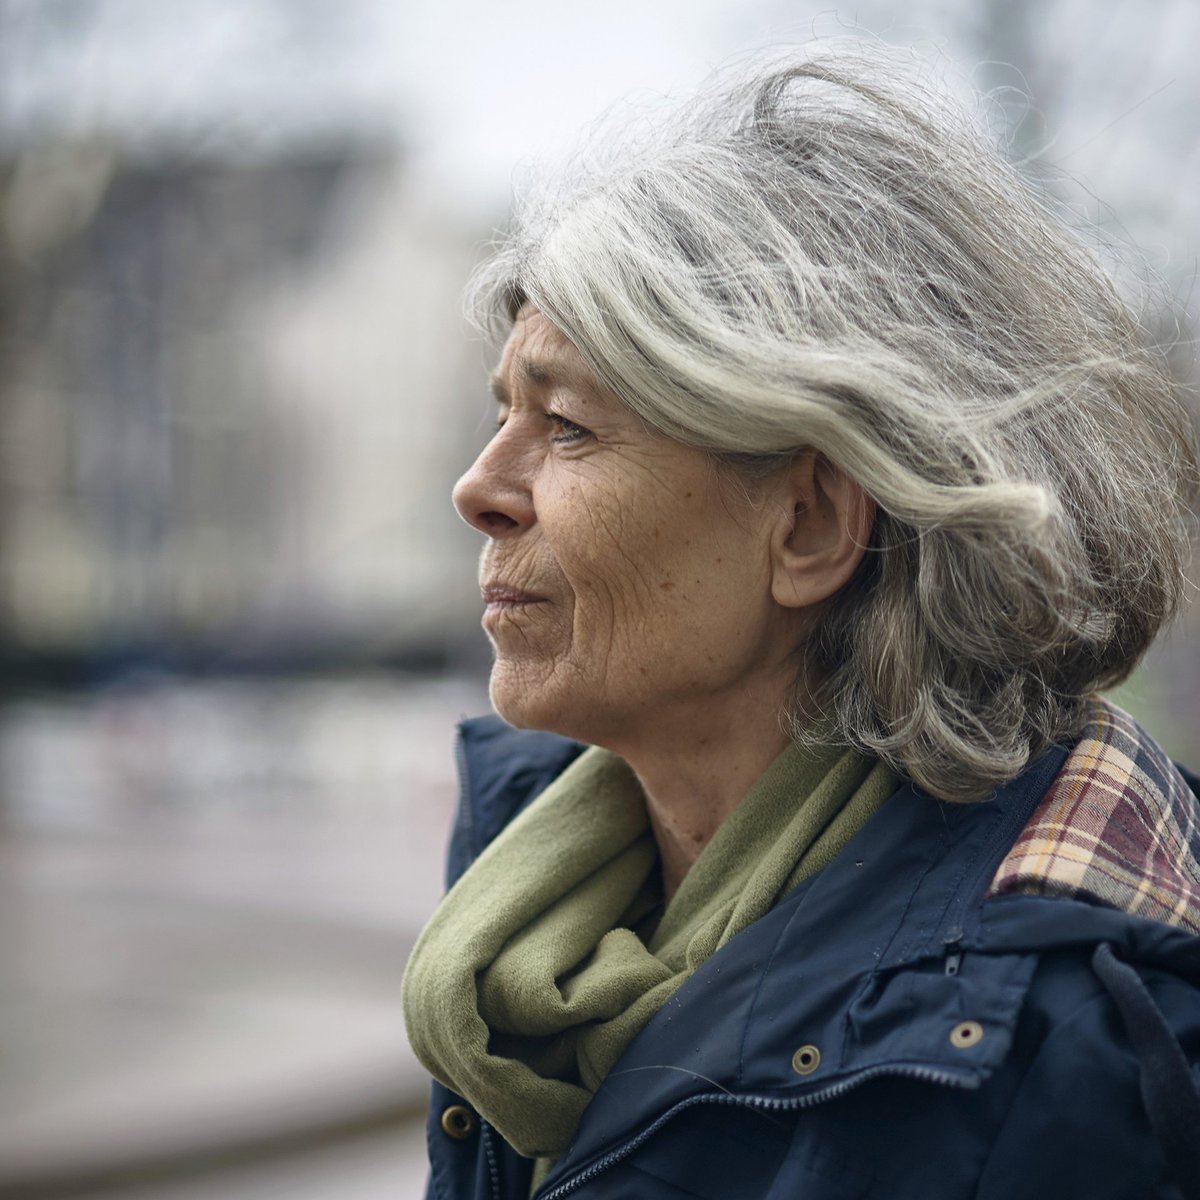 Do you know Anna Enquist? She's a renowned writer who connects her love for classical music with themes such as friendship, loss and aging. This Saturday at #flagey, she will discuss her book 'Quatuor', as an intro to Cuarteto Casals' concert: bit.ly/en-SQW